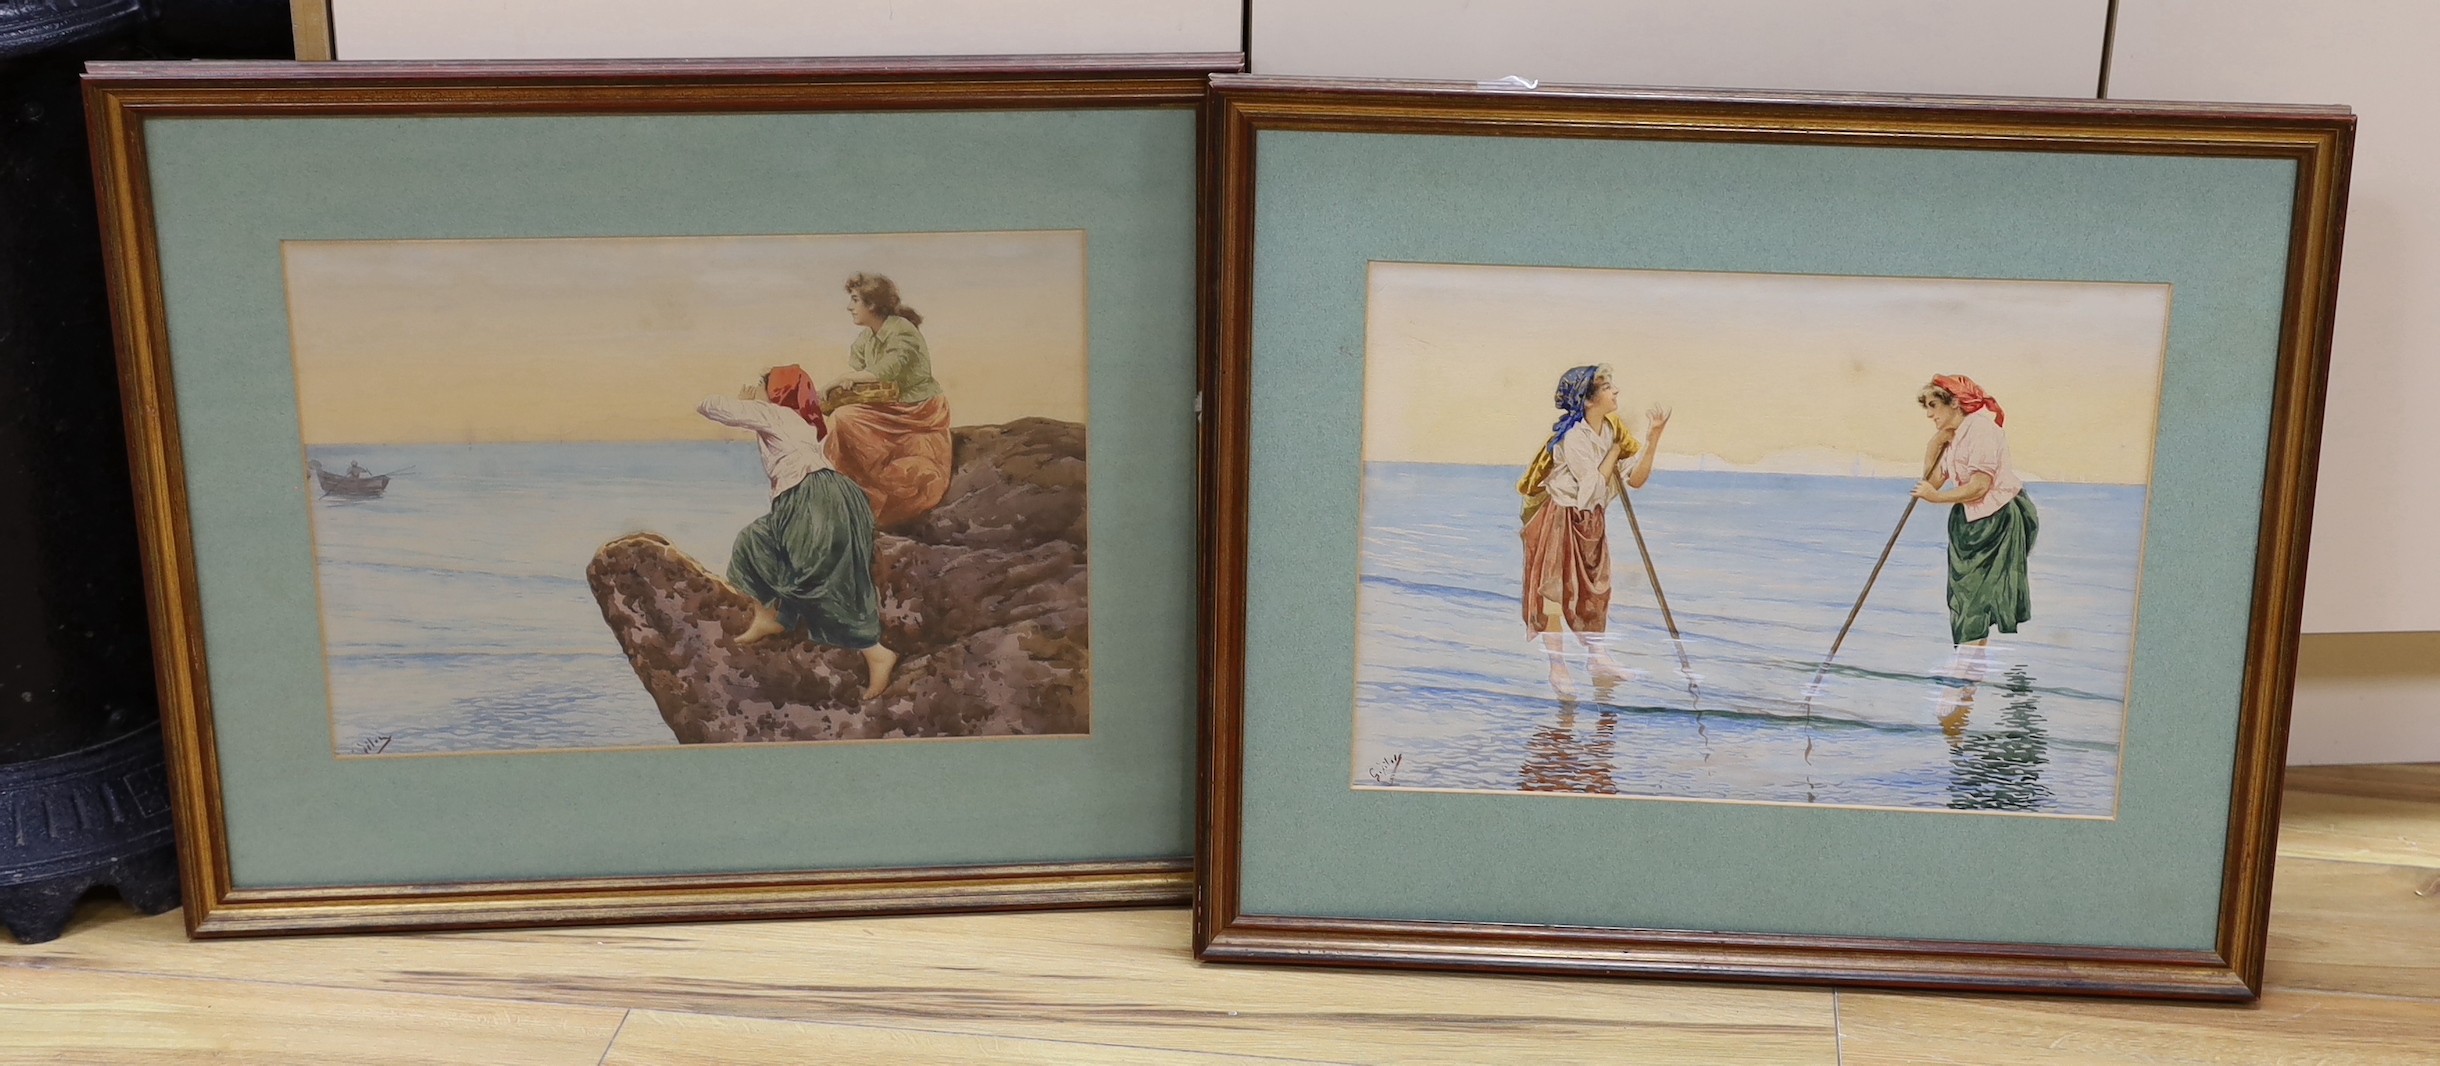 G. Filots , pair of watercolours, Fishermen's wives raking seaweed and Seated on the cliffs, signed, 32 x 44cm